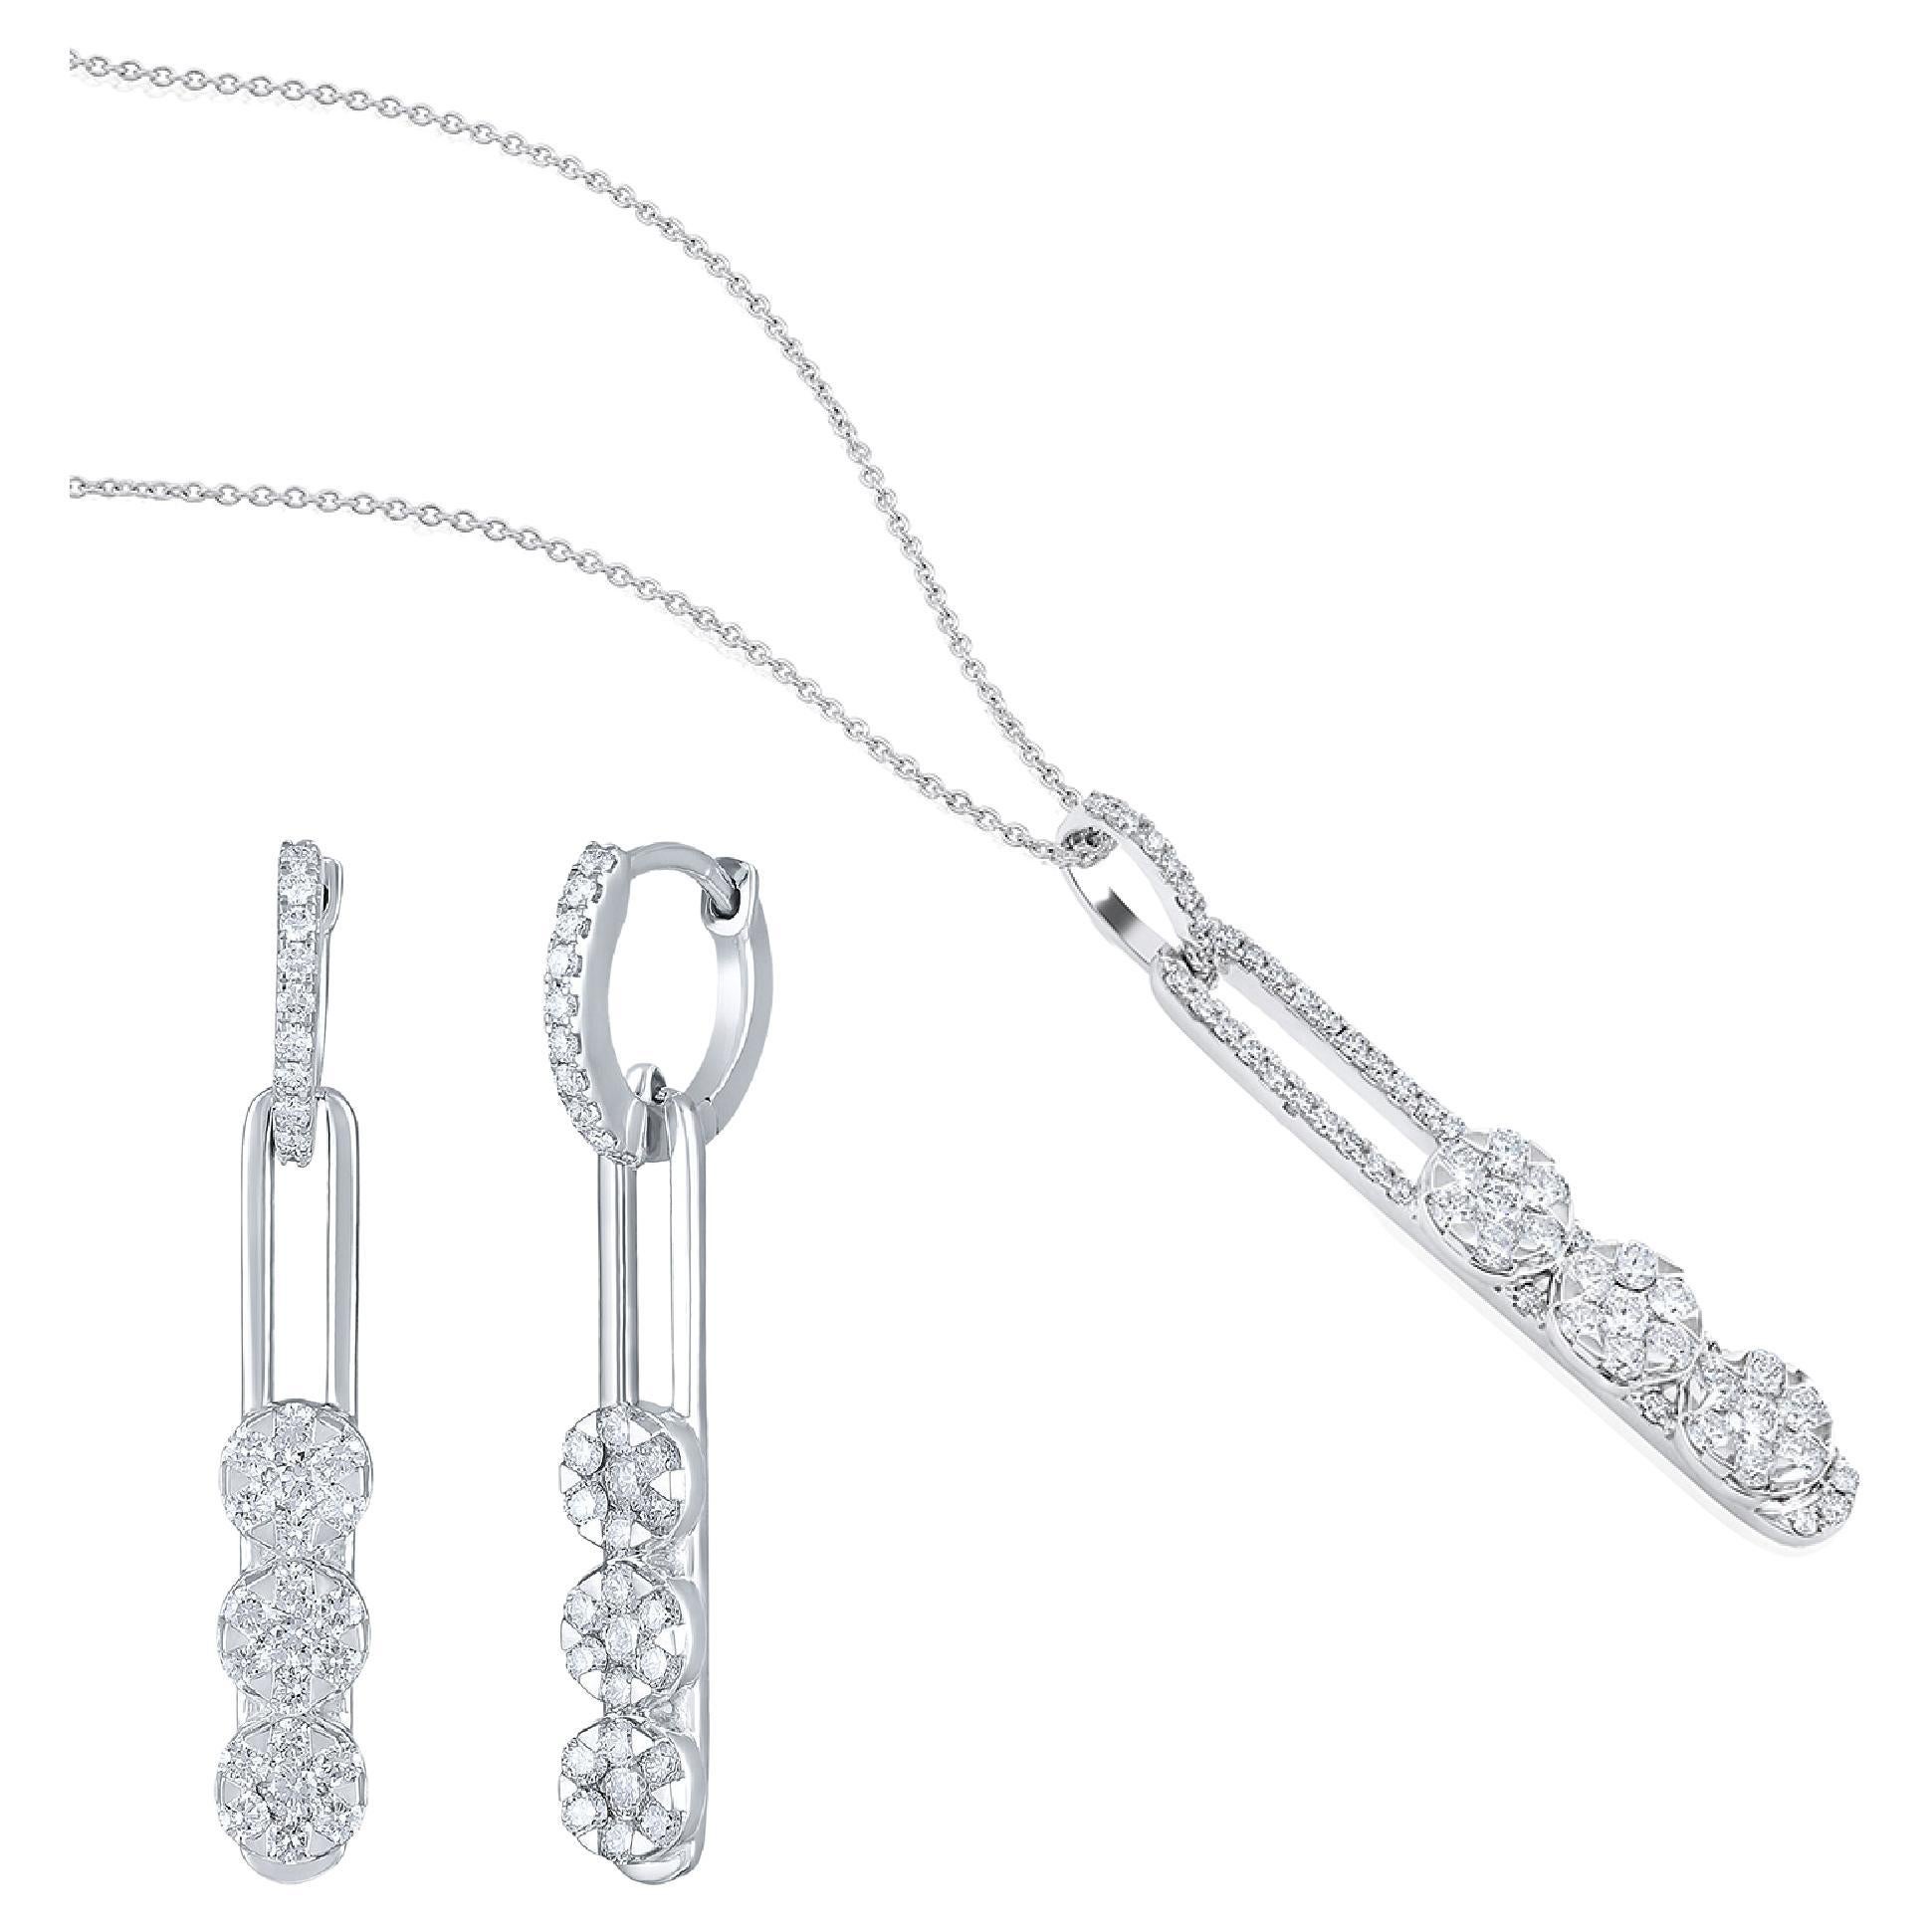 GSI Certified 2.8ct Natural Diamonds 14K Gold Y Necklace Long Earrings Set